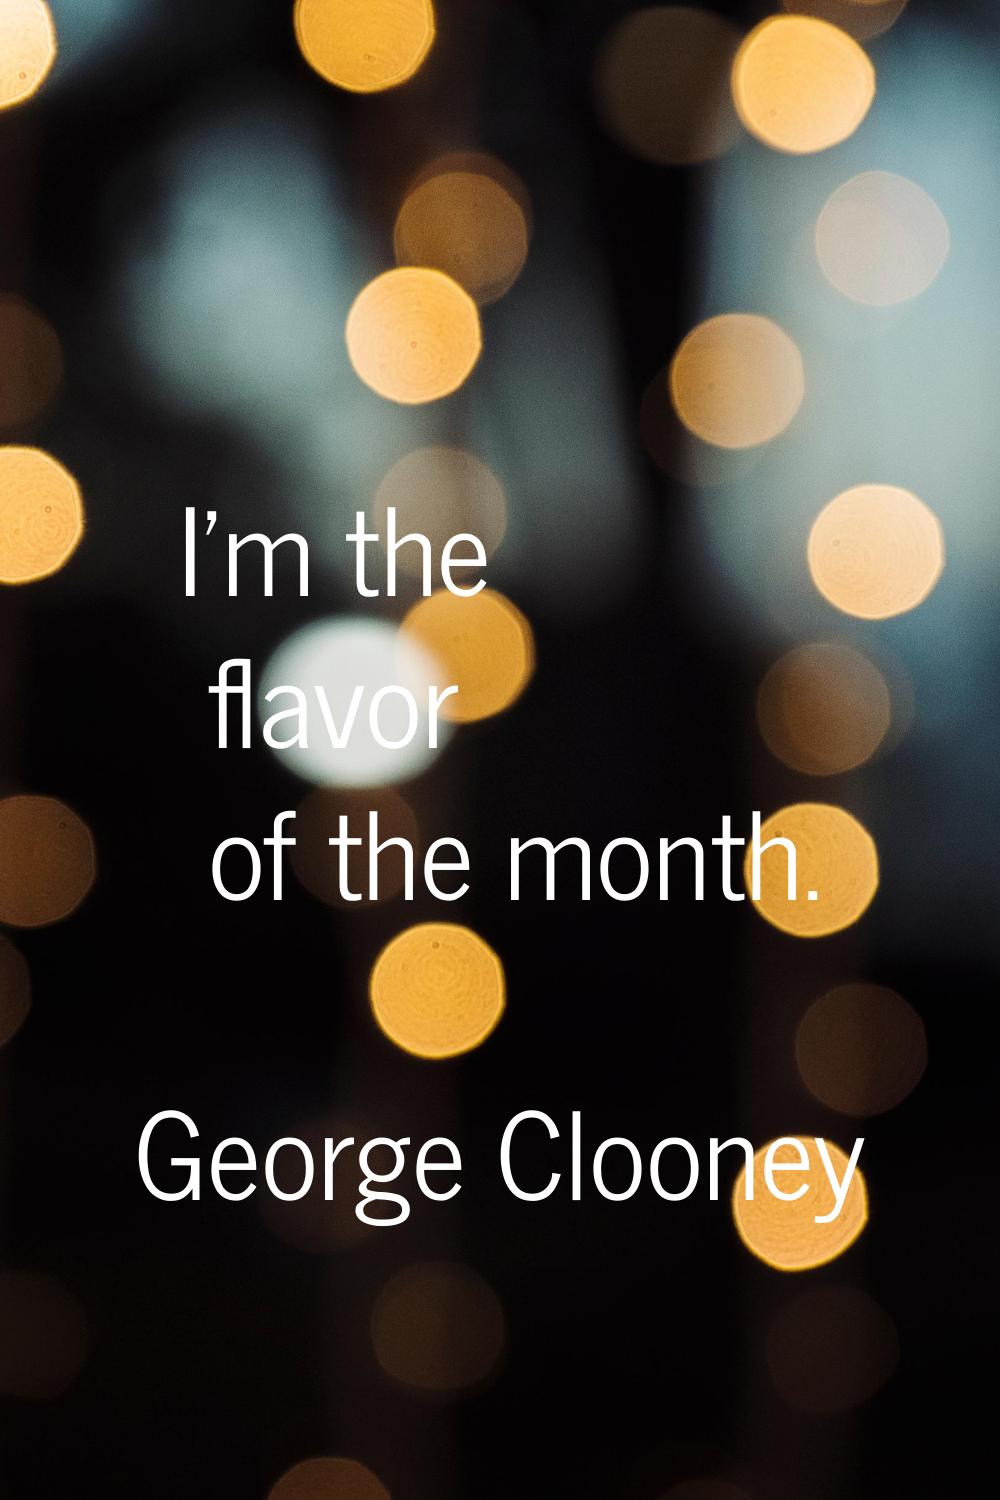 I'm the flavor of the month.